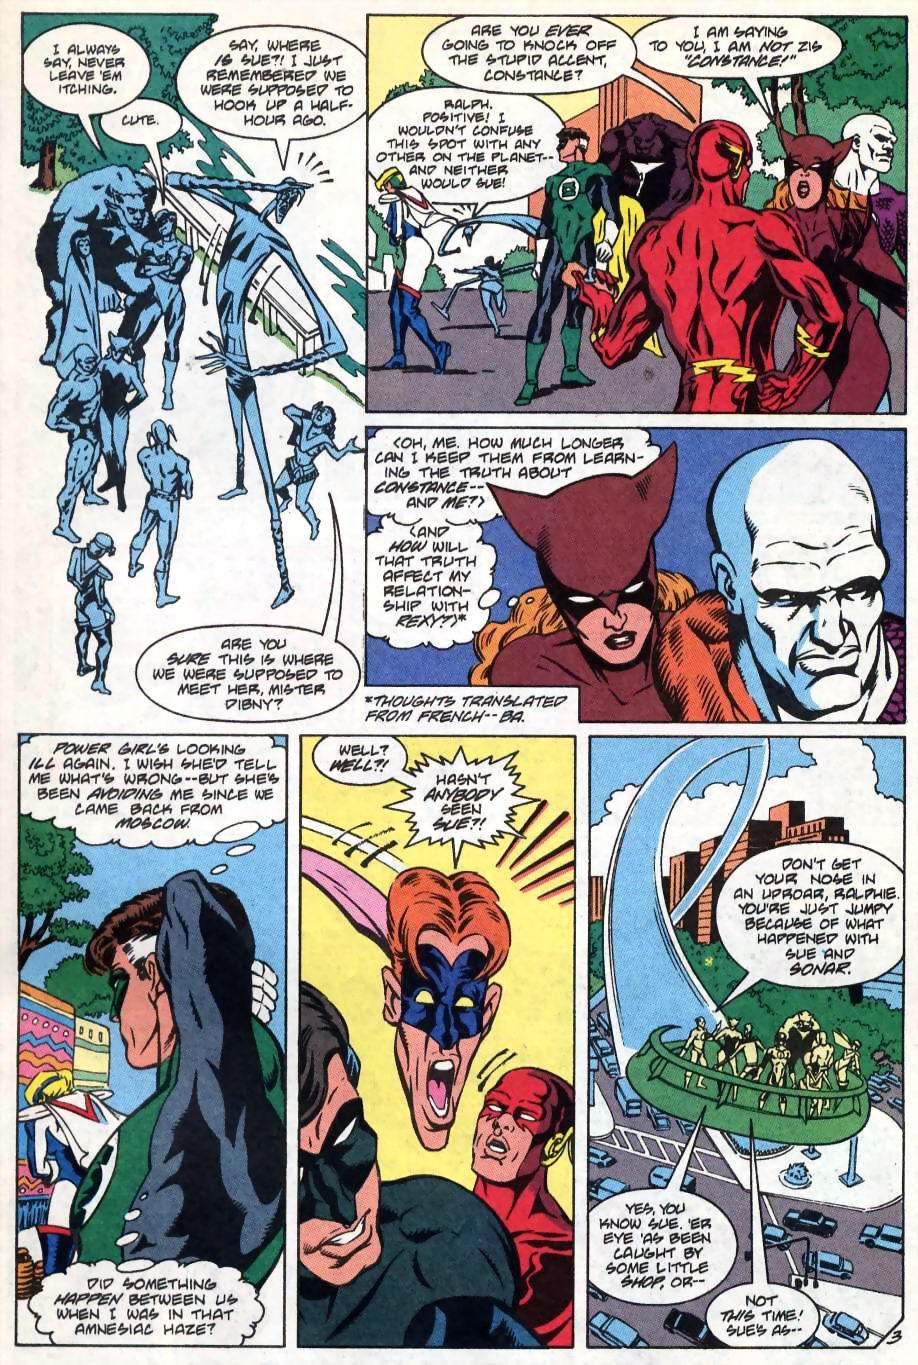 Justice League International (1993) 51 Page 3